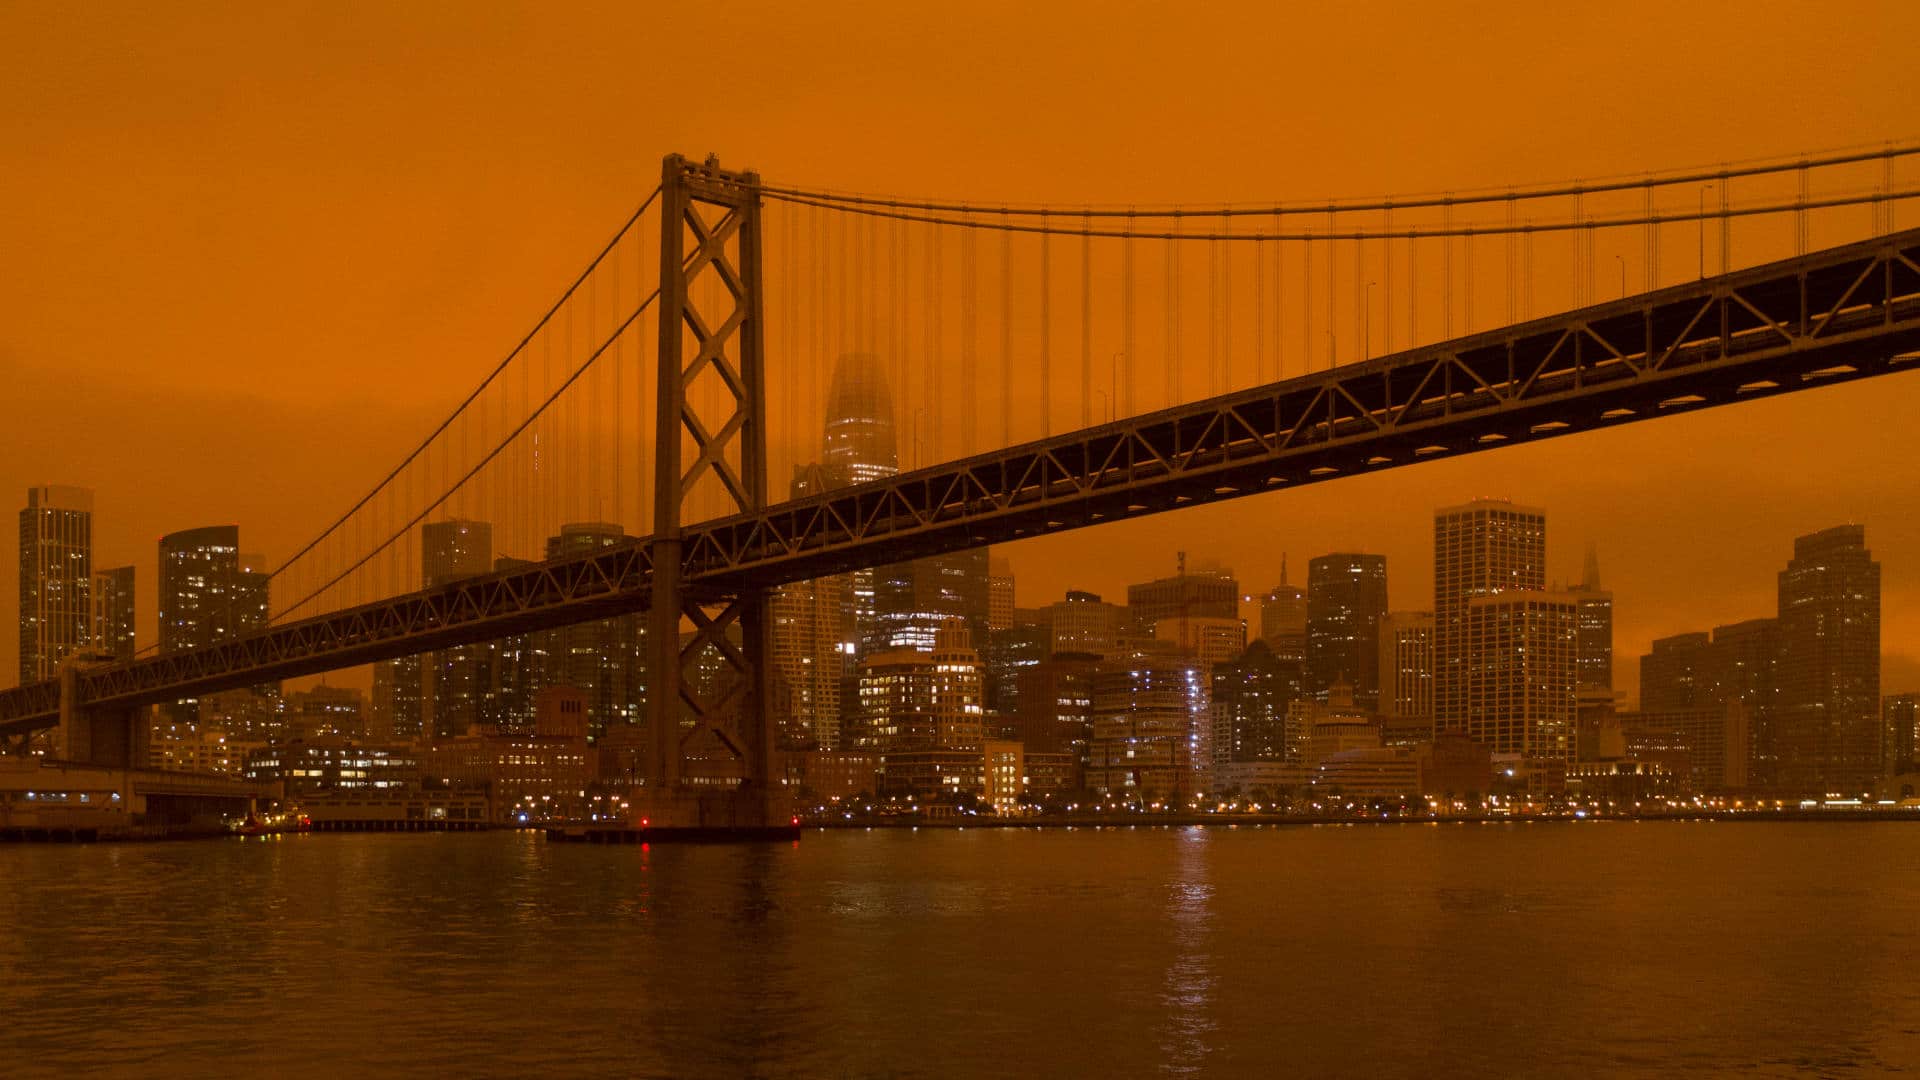 In September 2020, San Francisco experienced such heavy wildfire smoke that the sky turned orange.